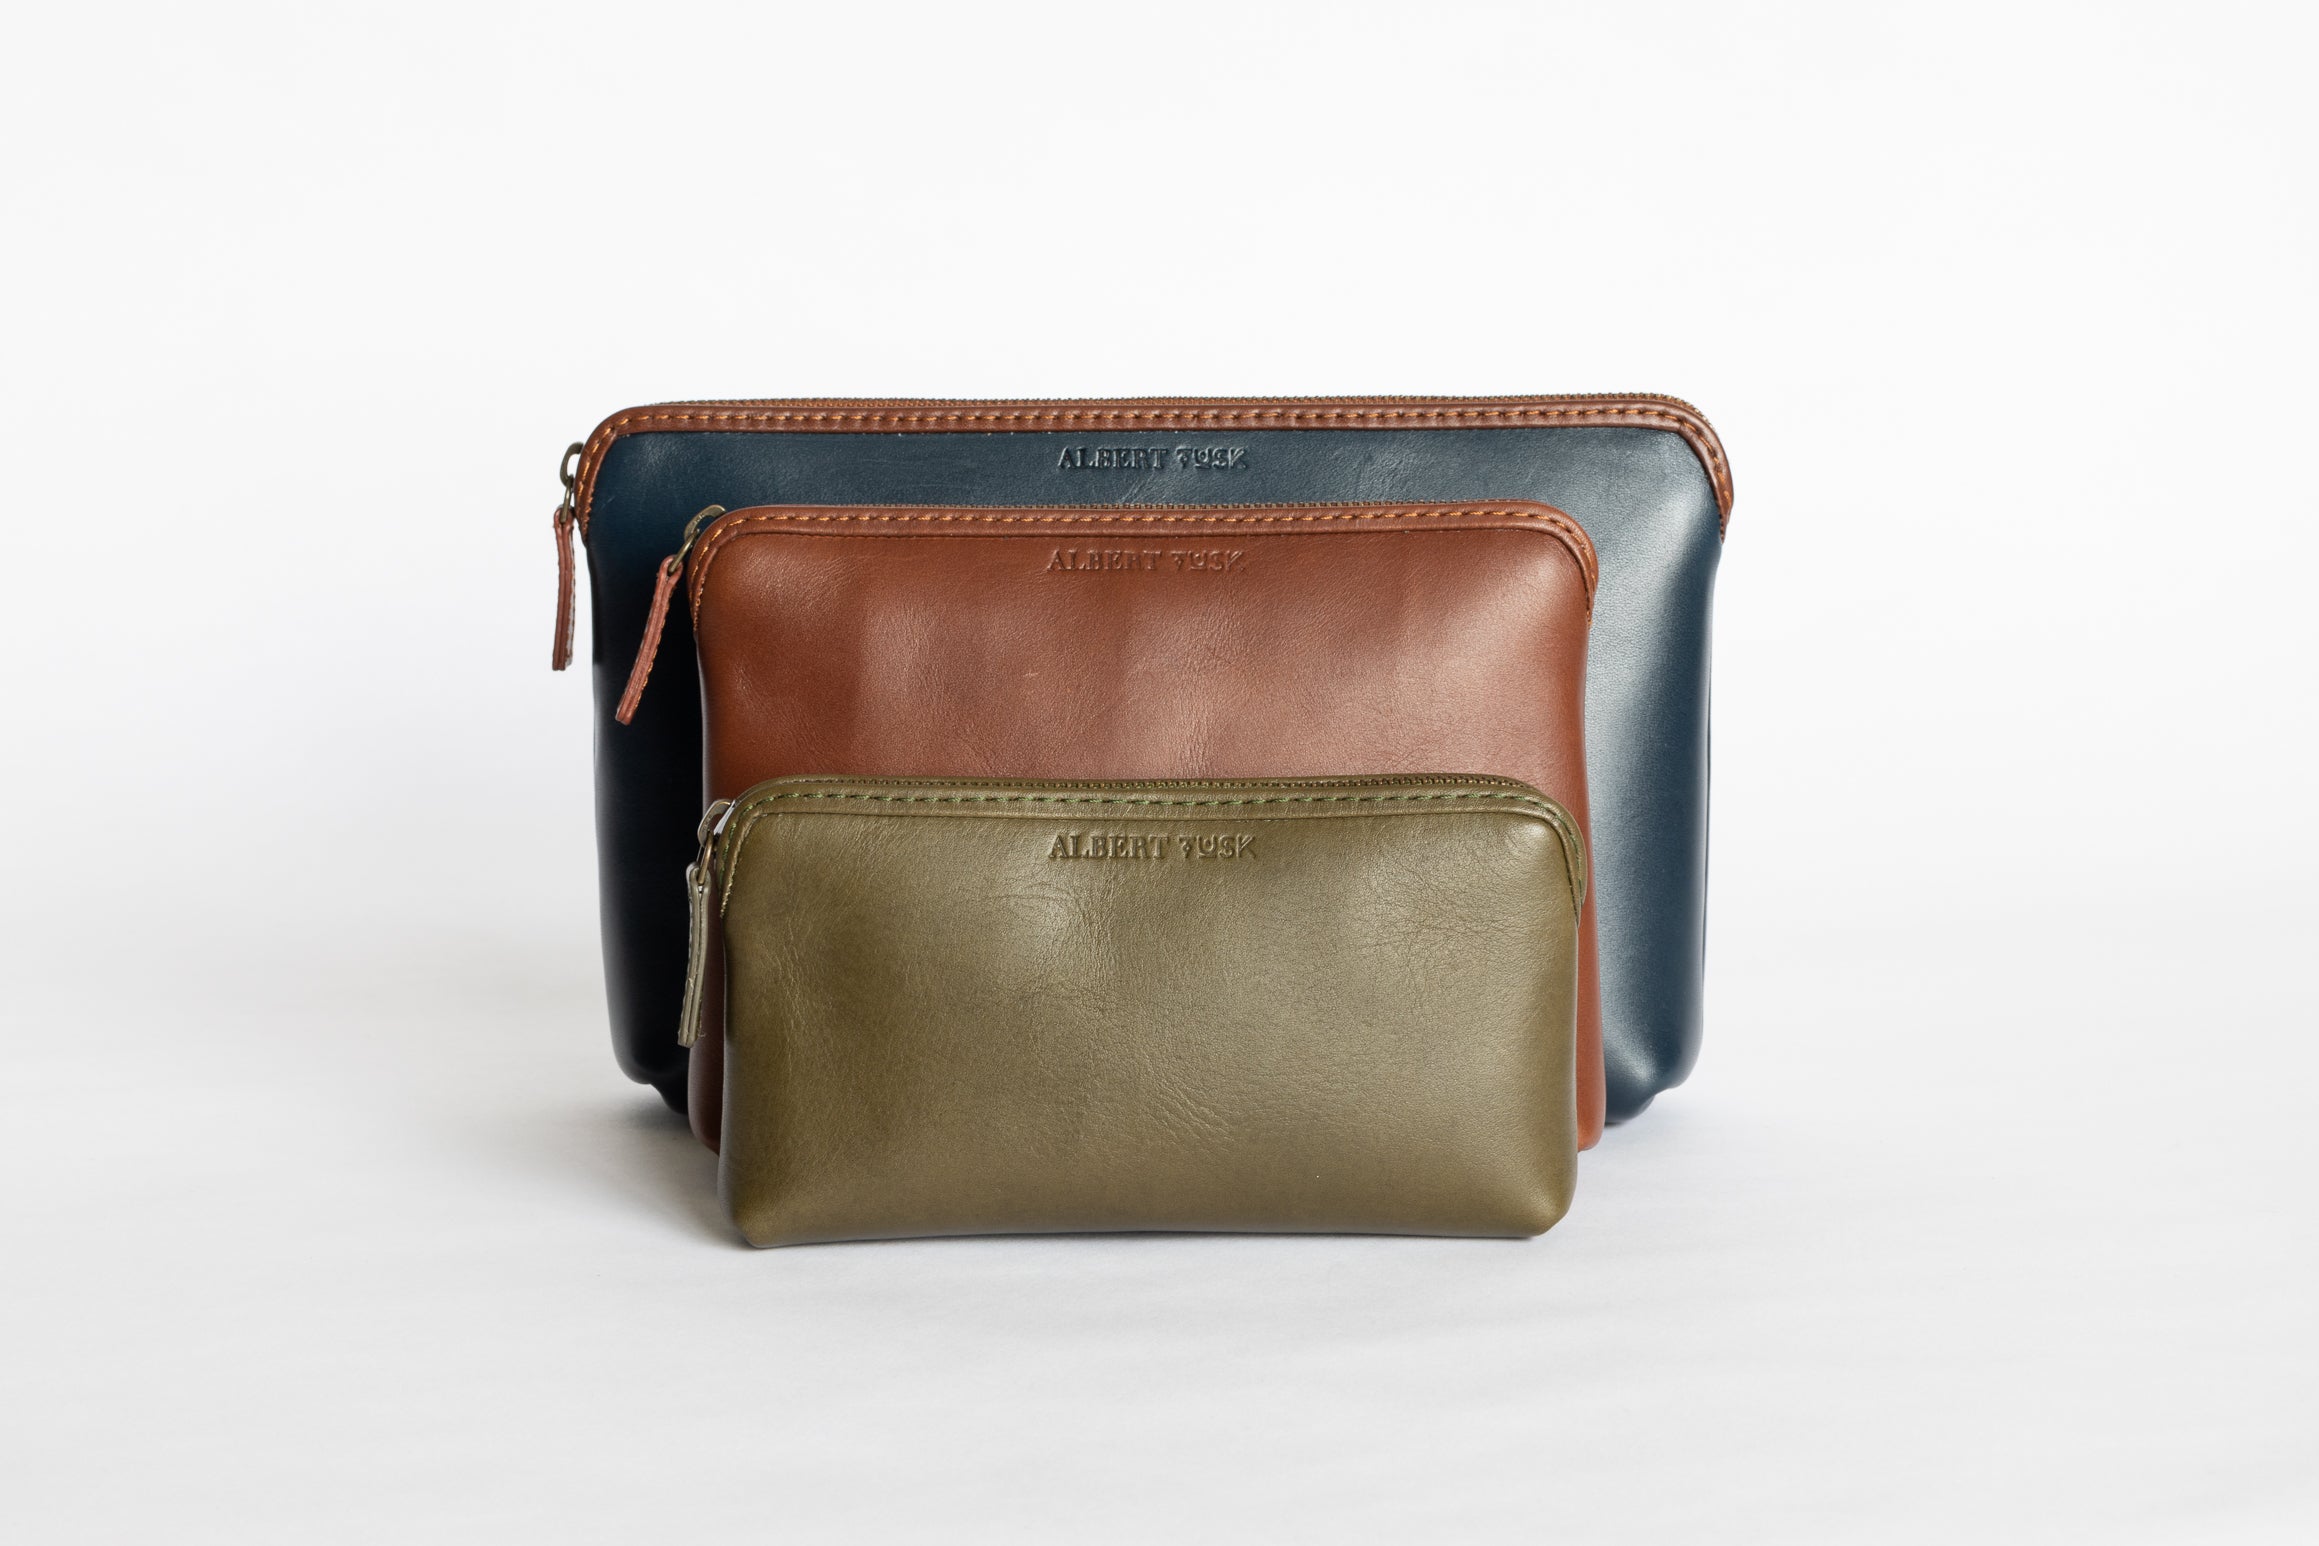 Woman On The Move | Phone Cover & Leather Purse Combos